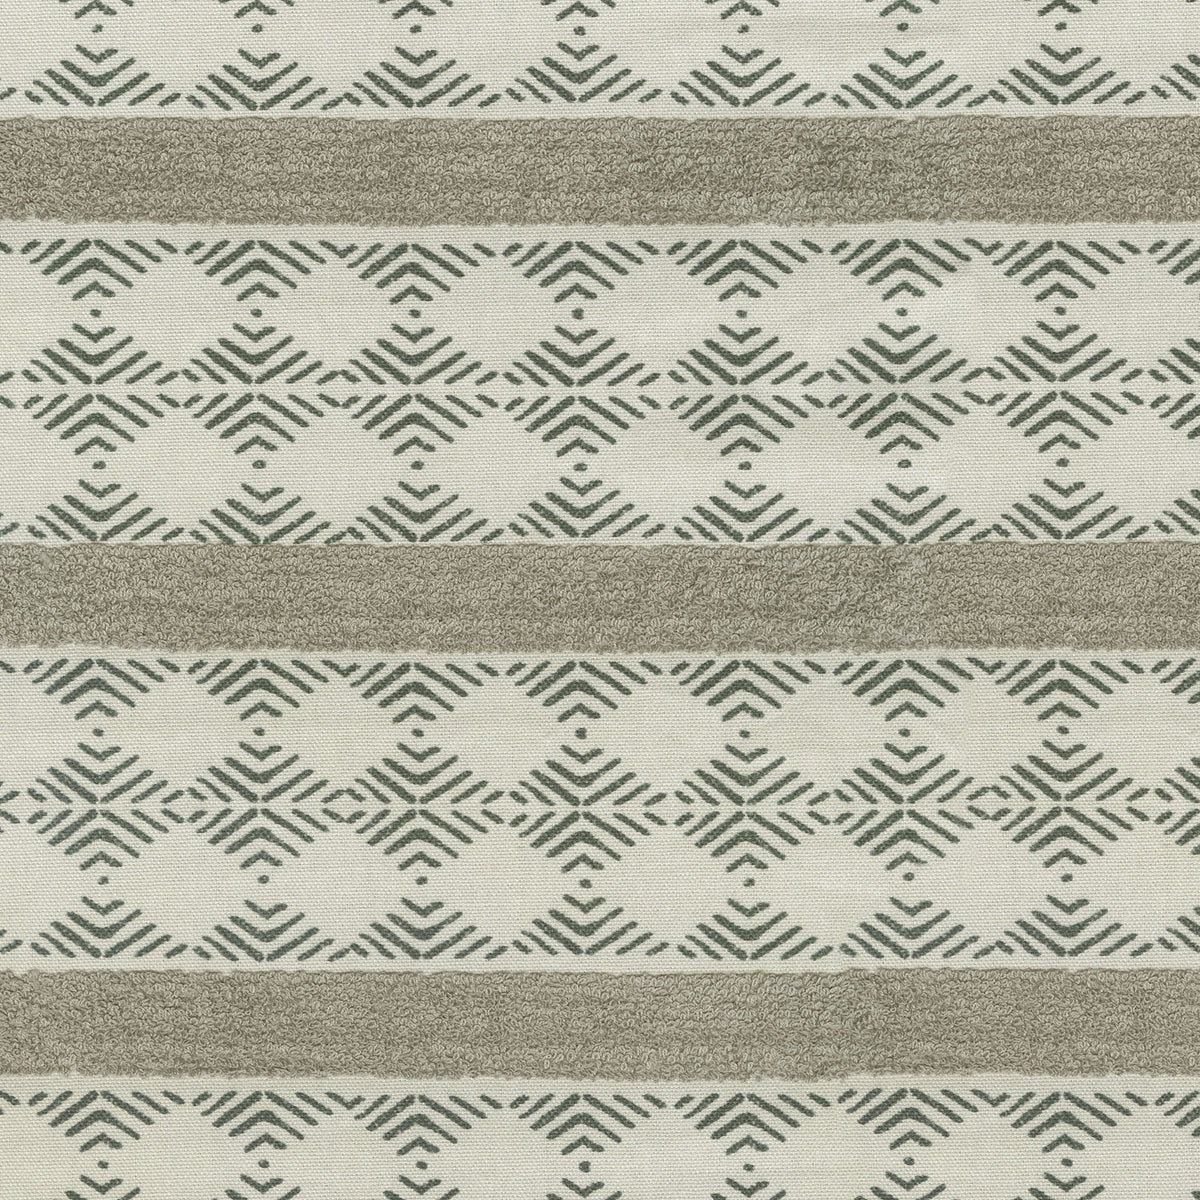 P/K Lifestyles Stitched Patch - Cloud 410132 Upholstery Fabric